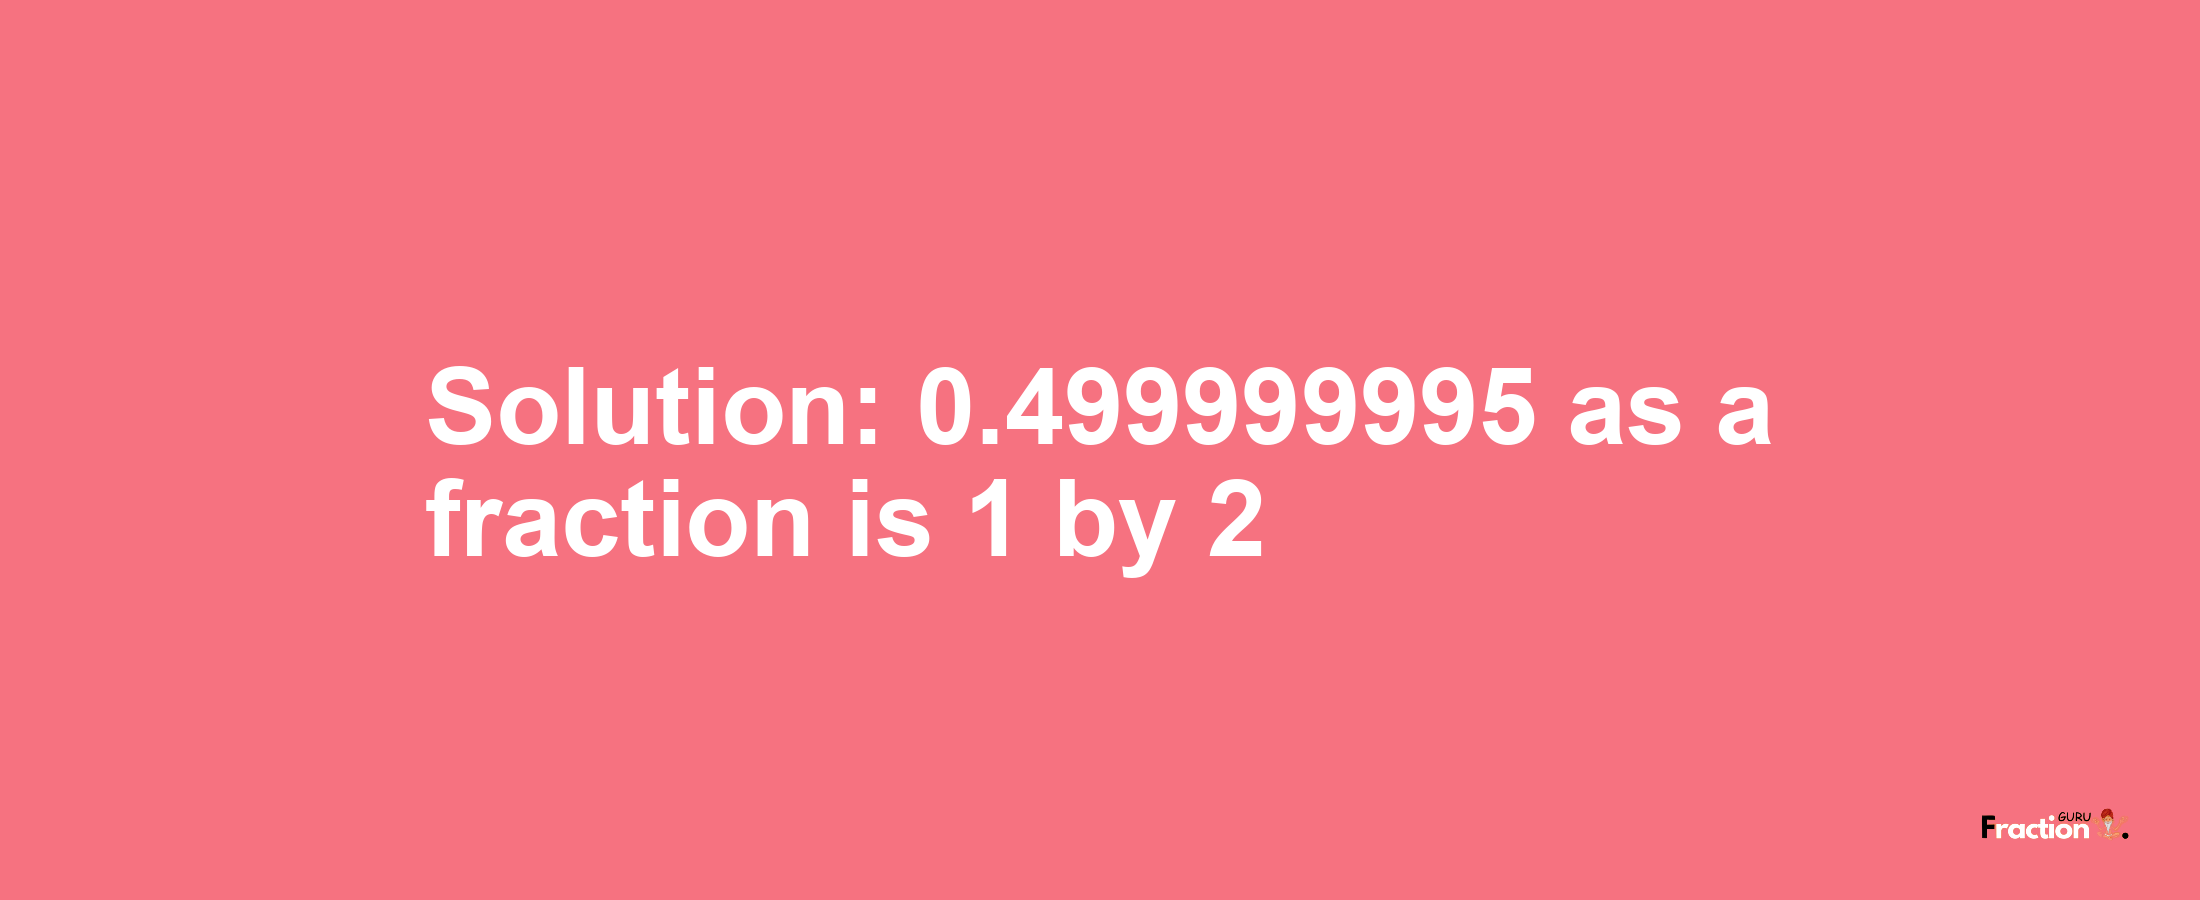 Solution:0.499999995 as a fraction is 1/2